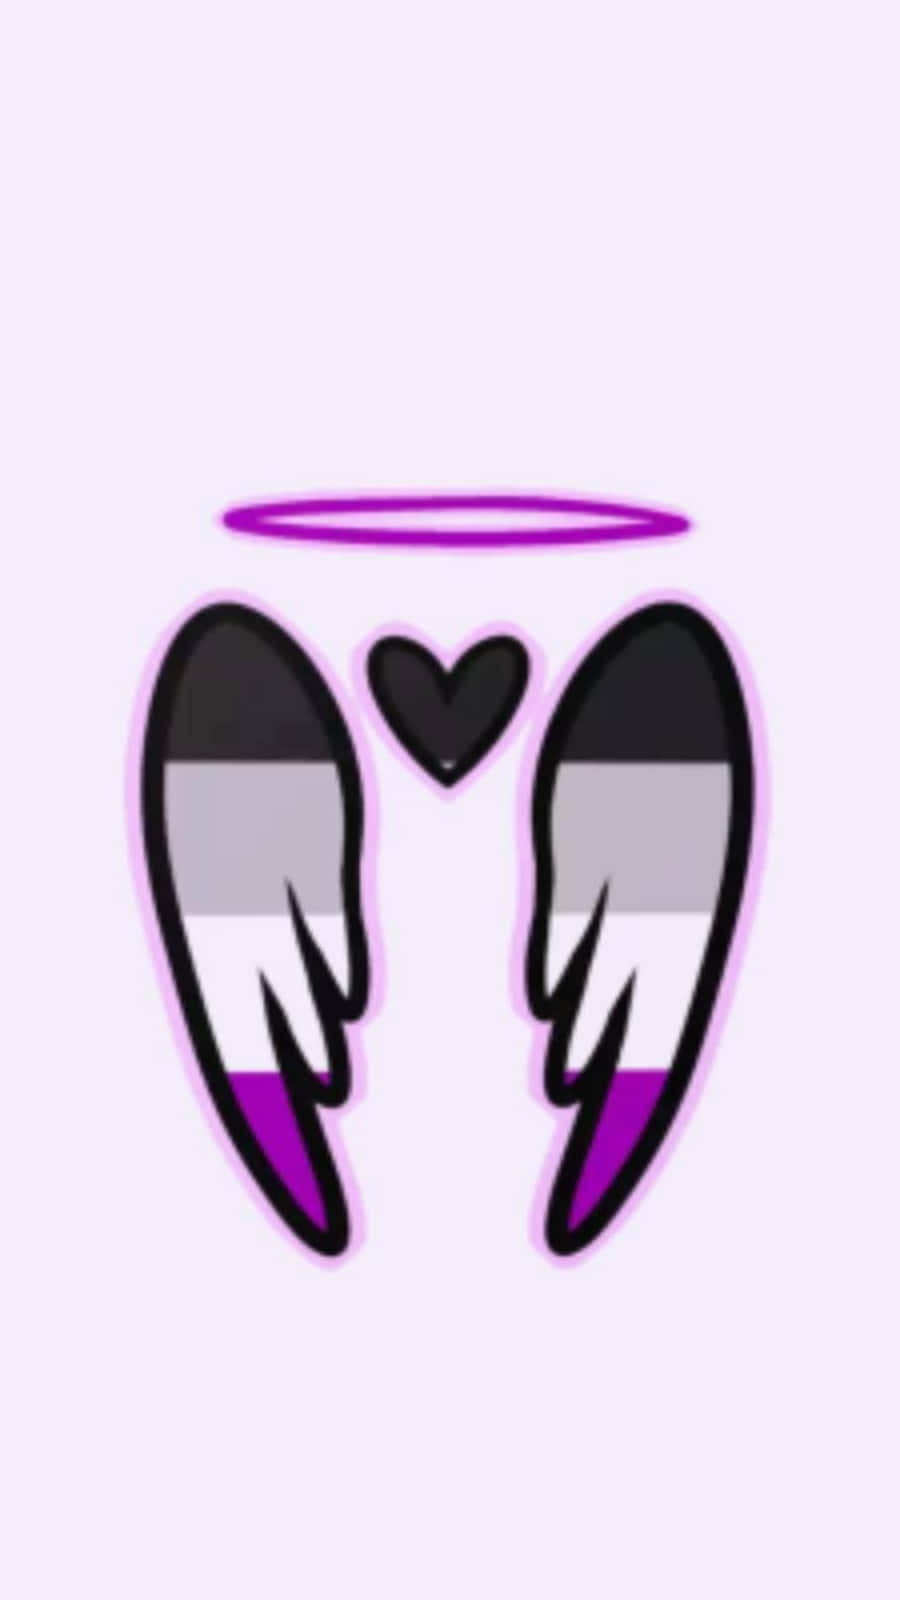 Asexual Angel Wings With Heart Wallpaper